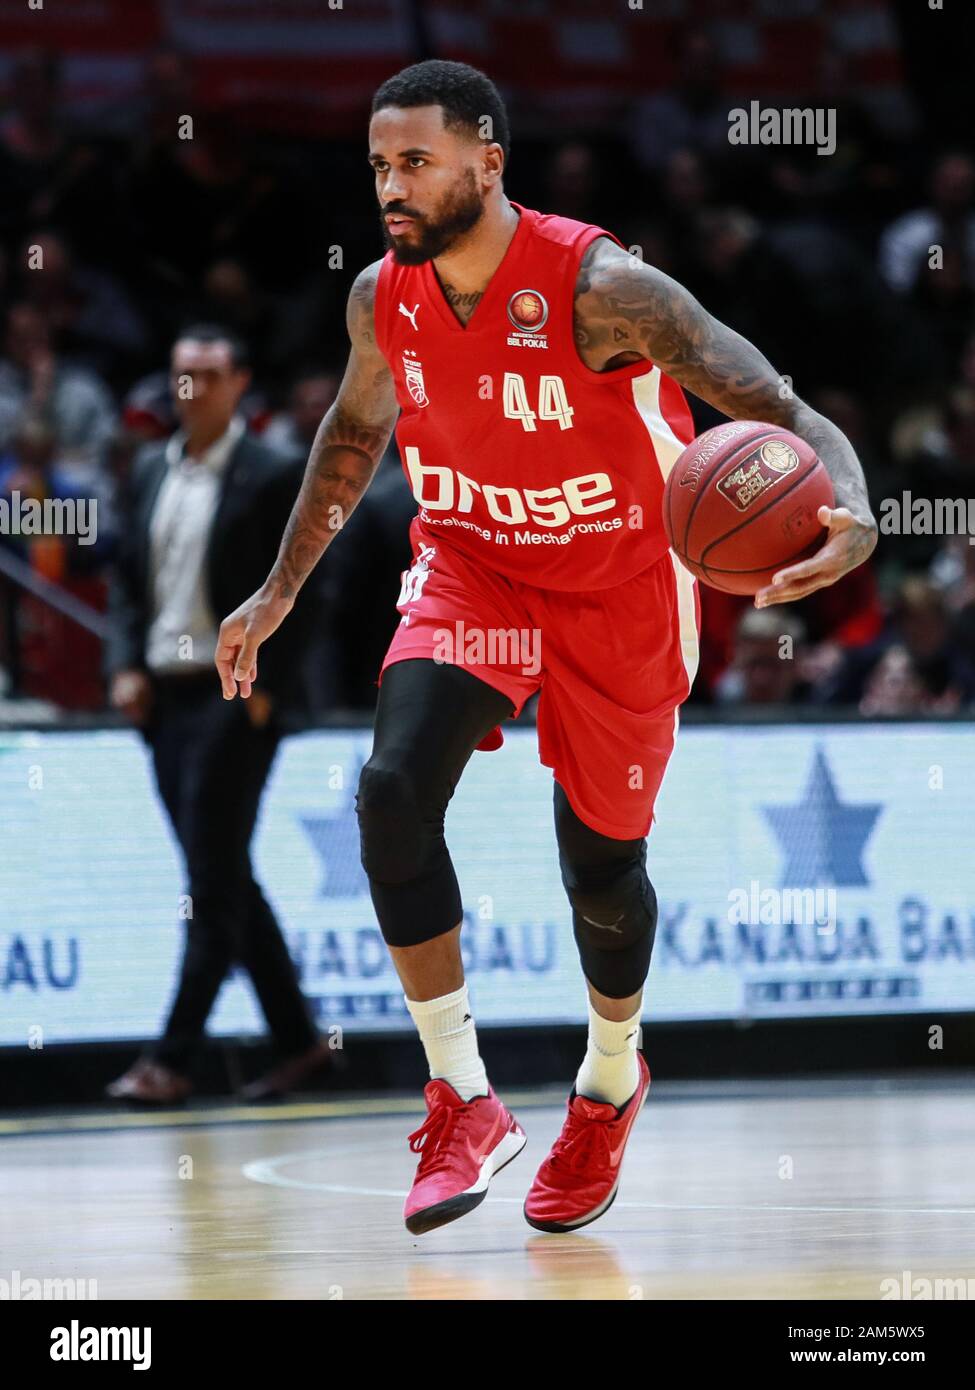 Braunschweig, Germany, December 14, 2019: Basketball player Bryce Taylor in action during the BBL Pokal match Stock Photo